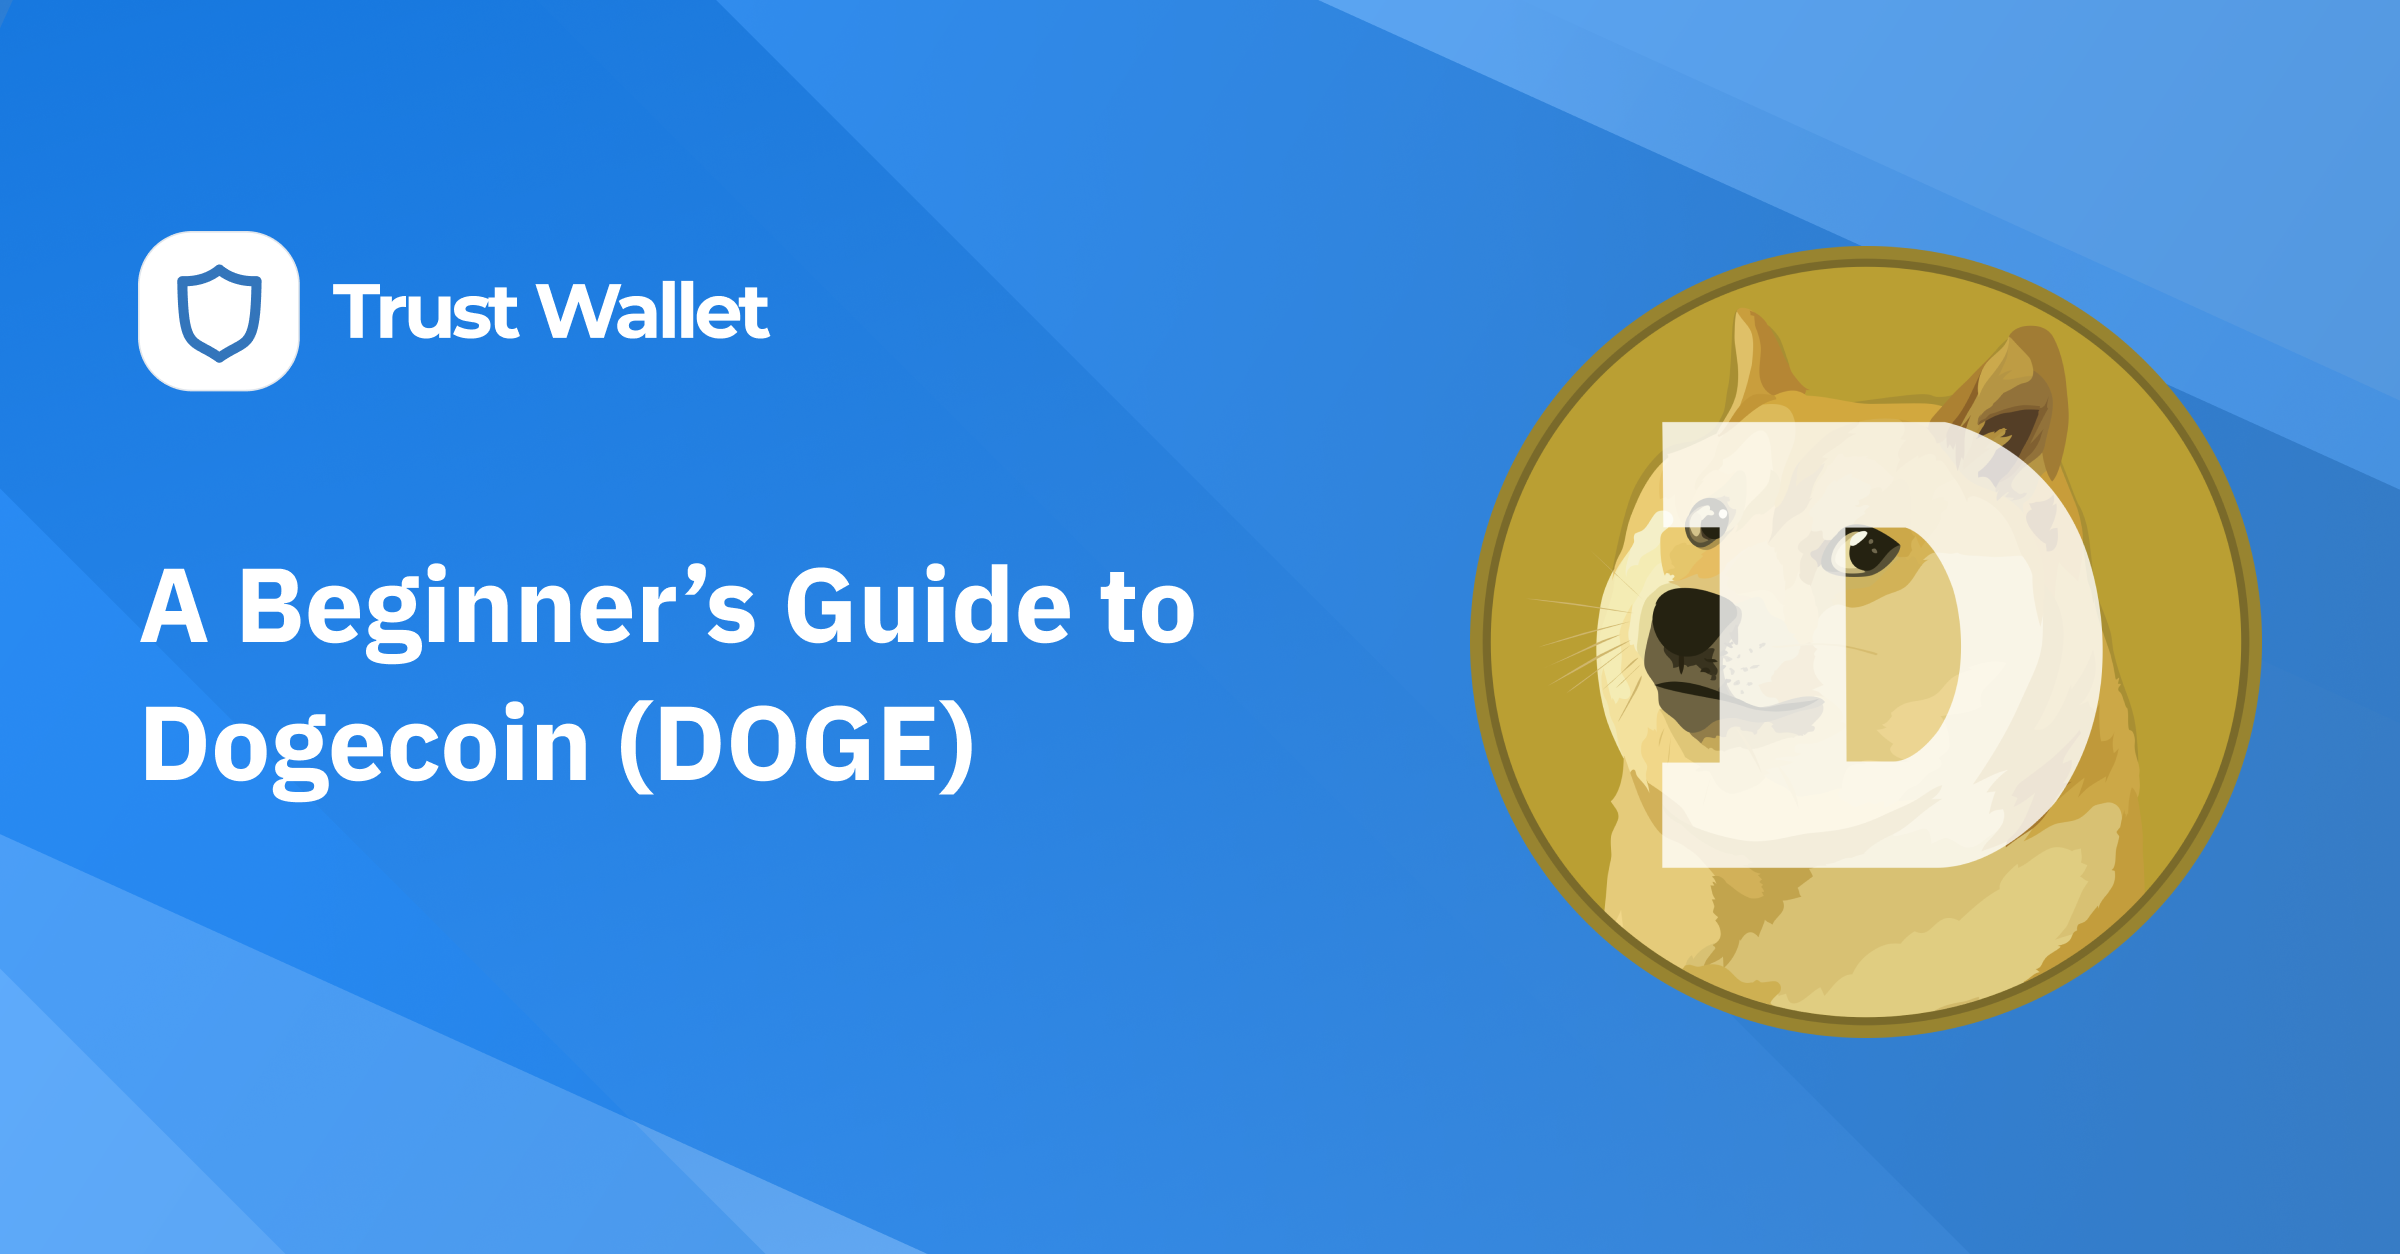 A Beginner’s Guide to Dogecoin (DOGE)